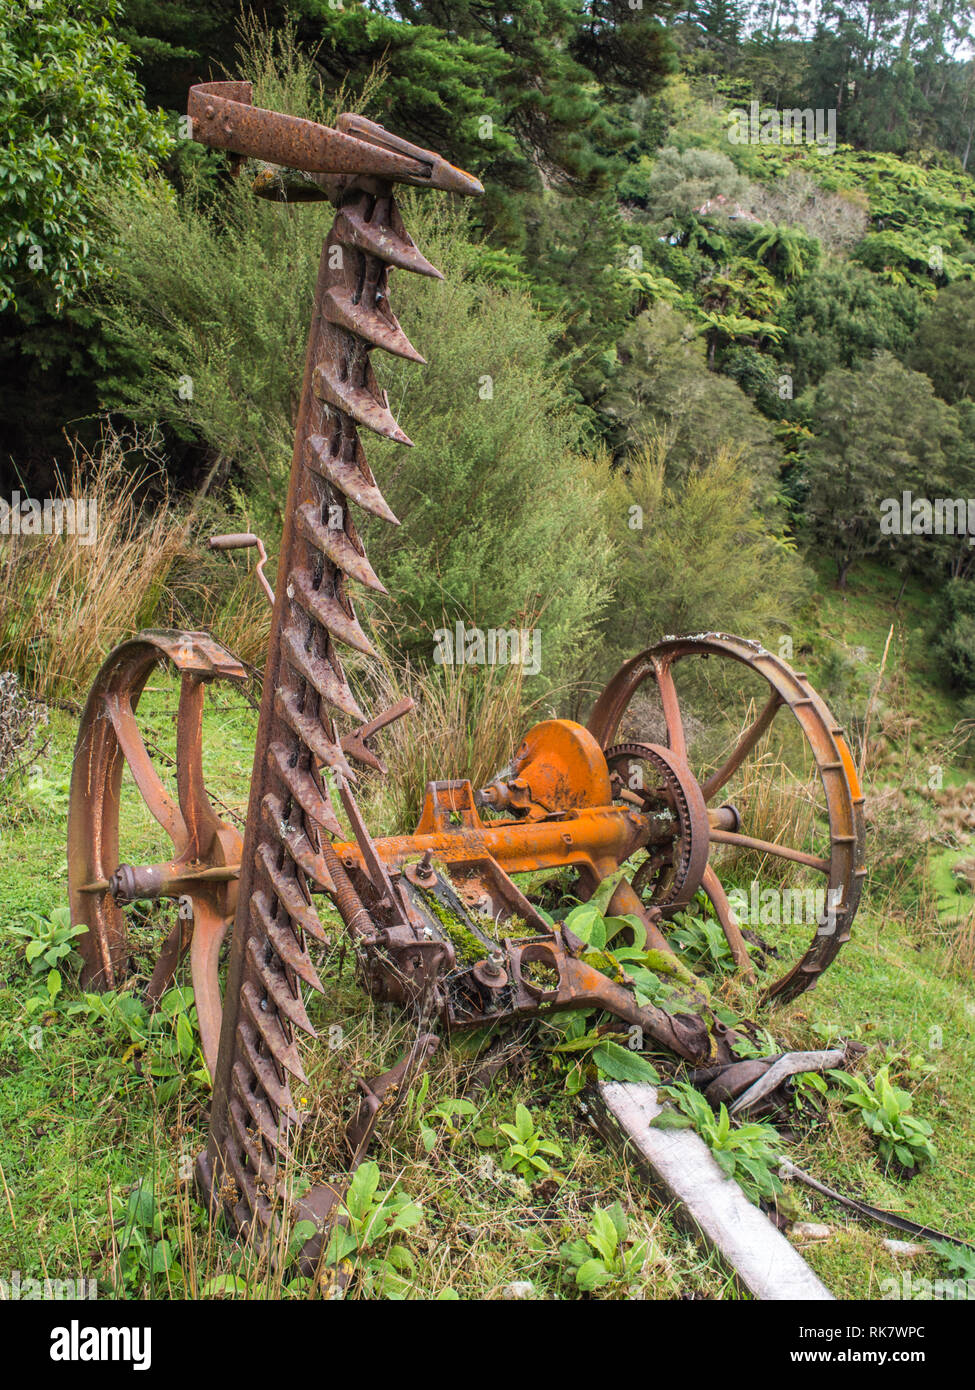 Derelict horse drawn sickle mower, overgrown by regenerating forest, Ahu Ahu Ohu, Ahuahu Valley, North Island, New Zealand Stock Photo